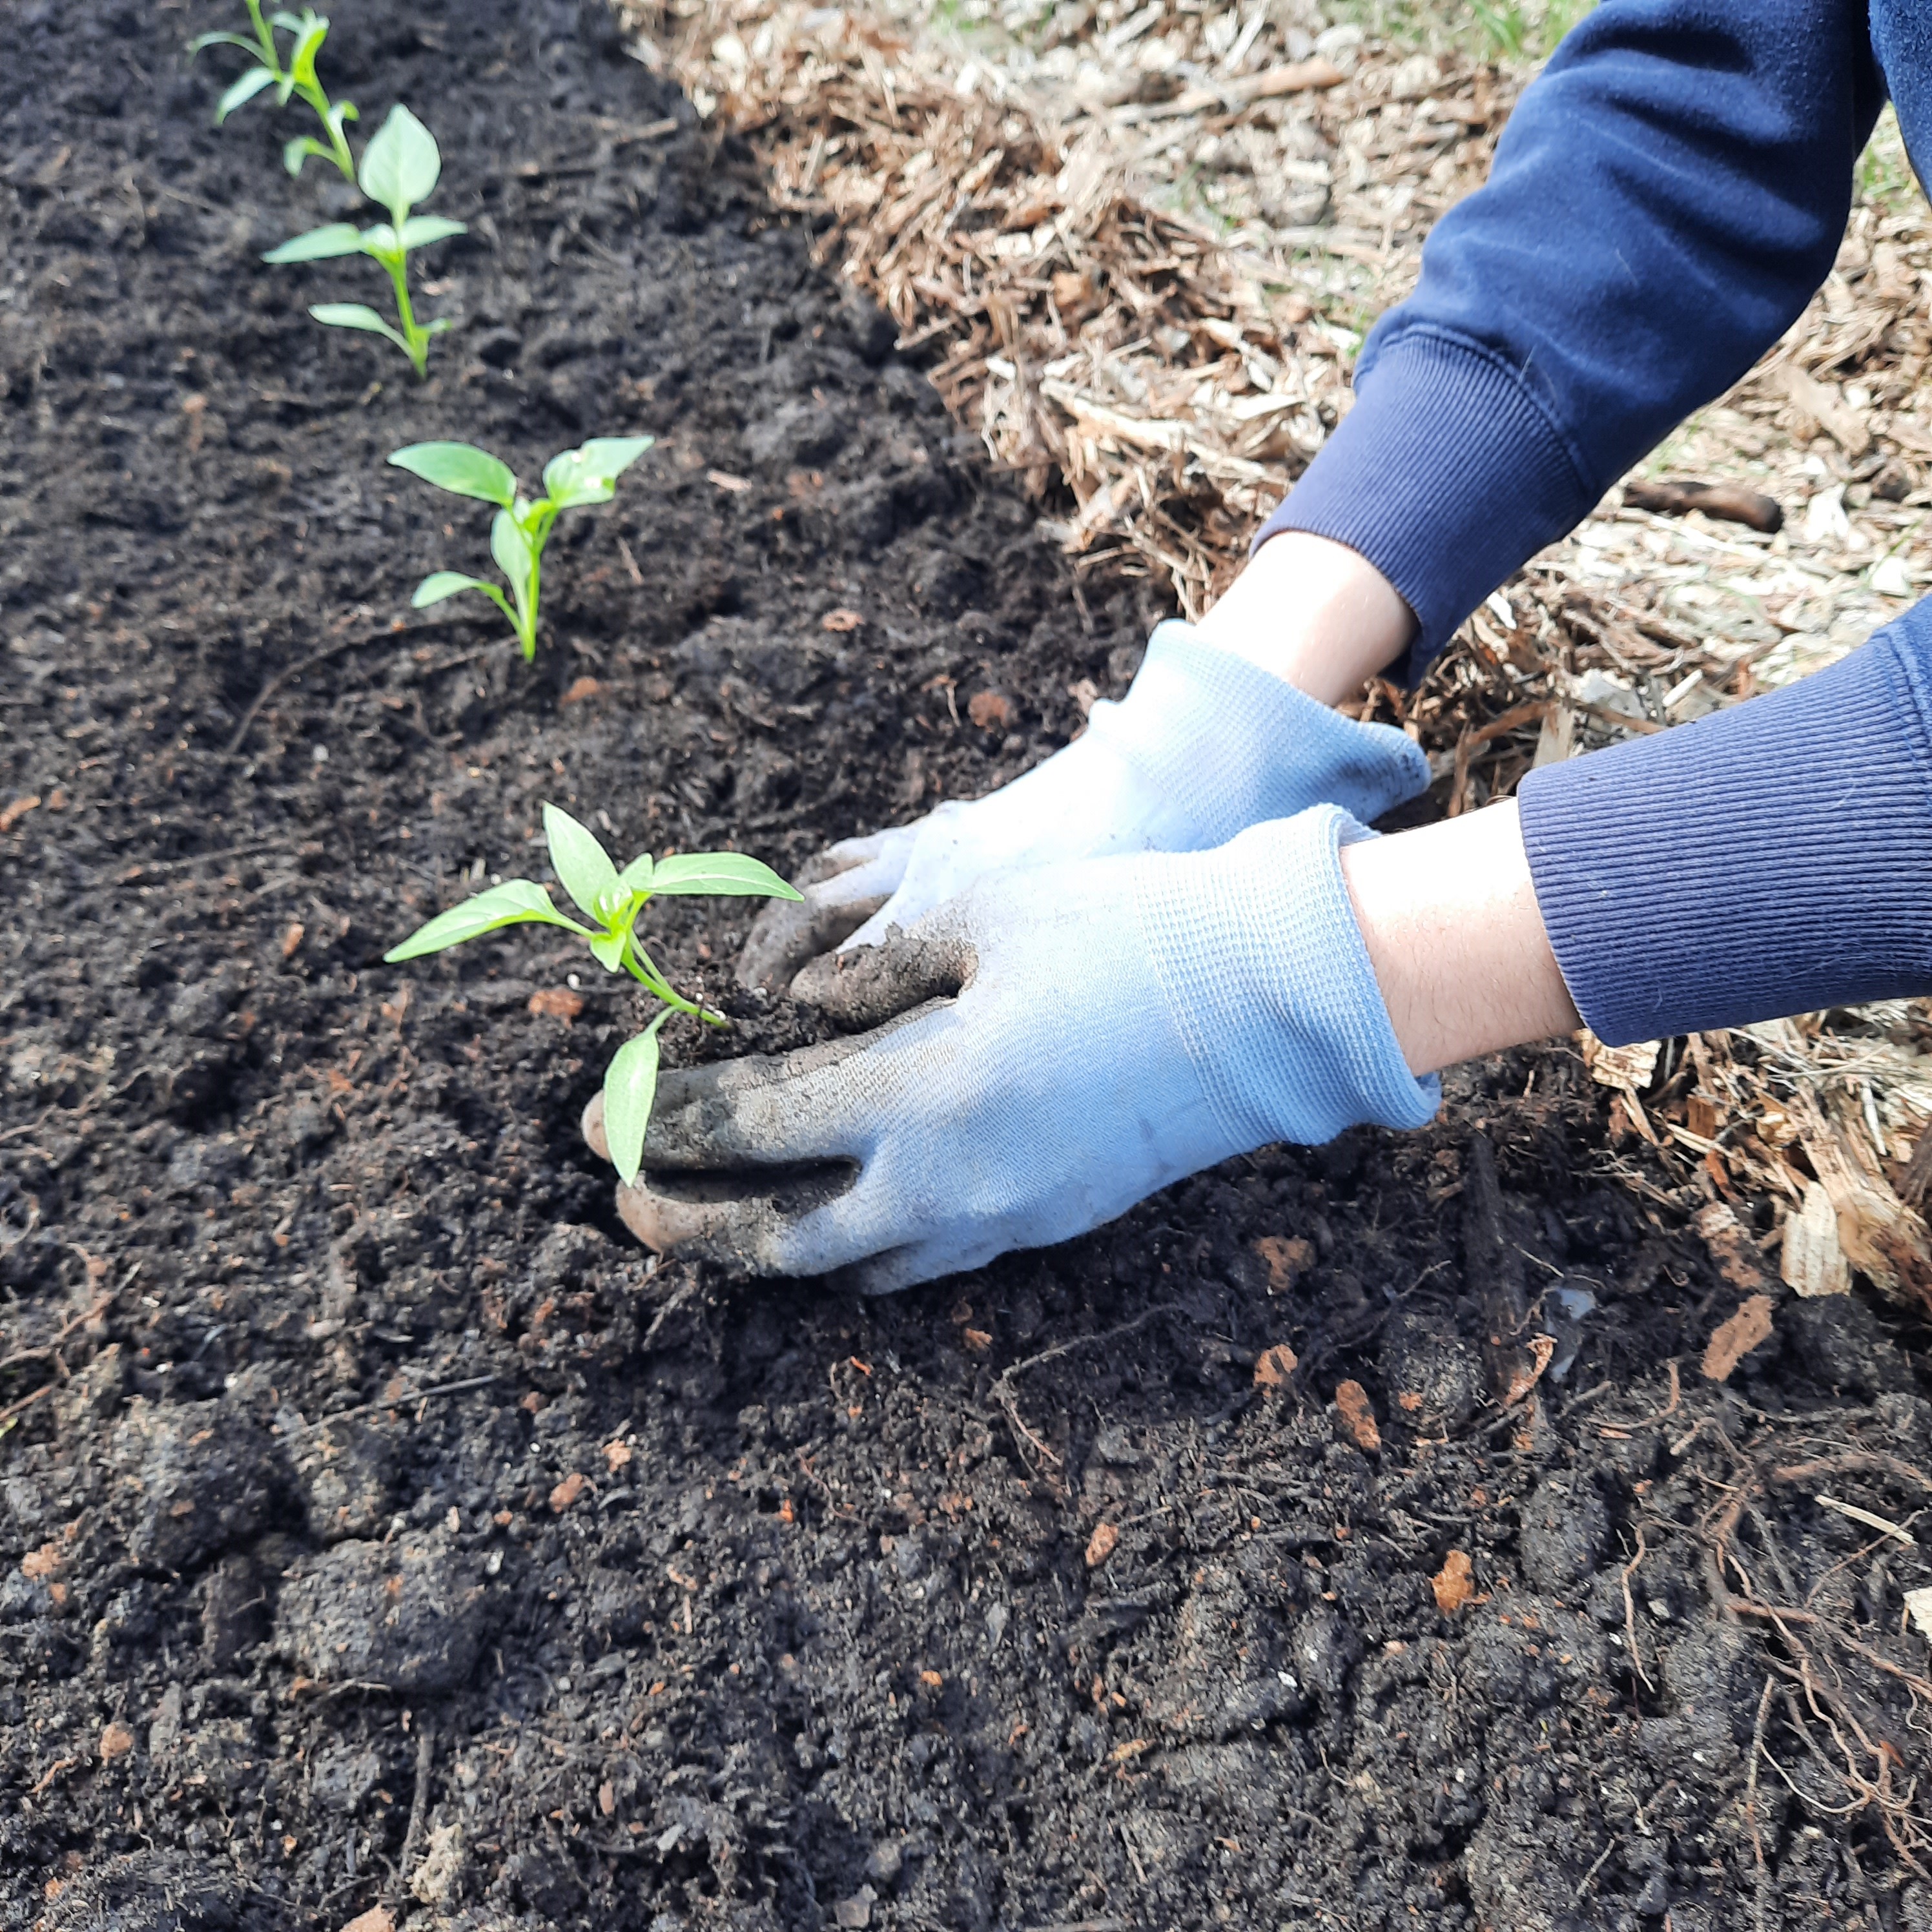 A gardener&rsquo;s gloved hands planting pepper plants